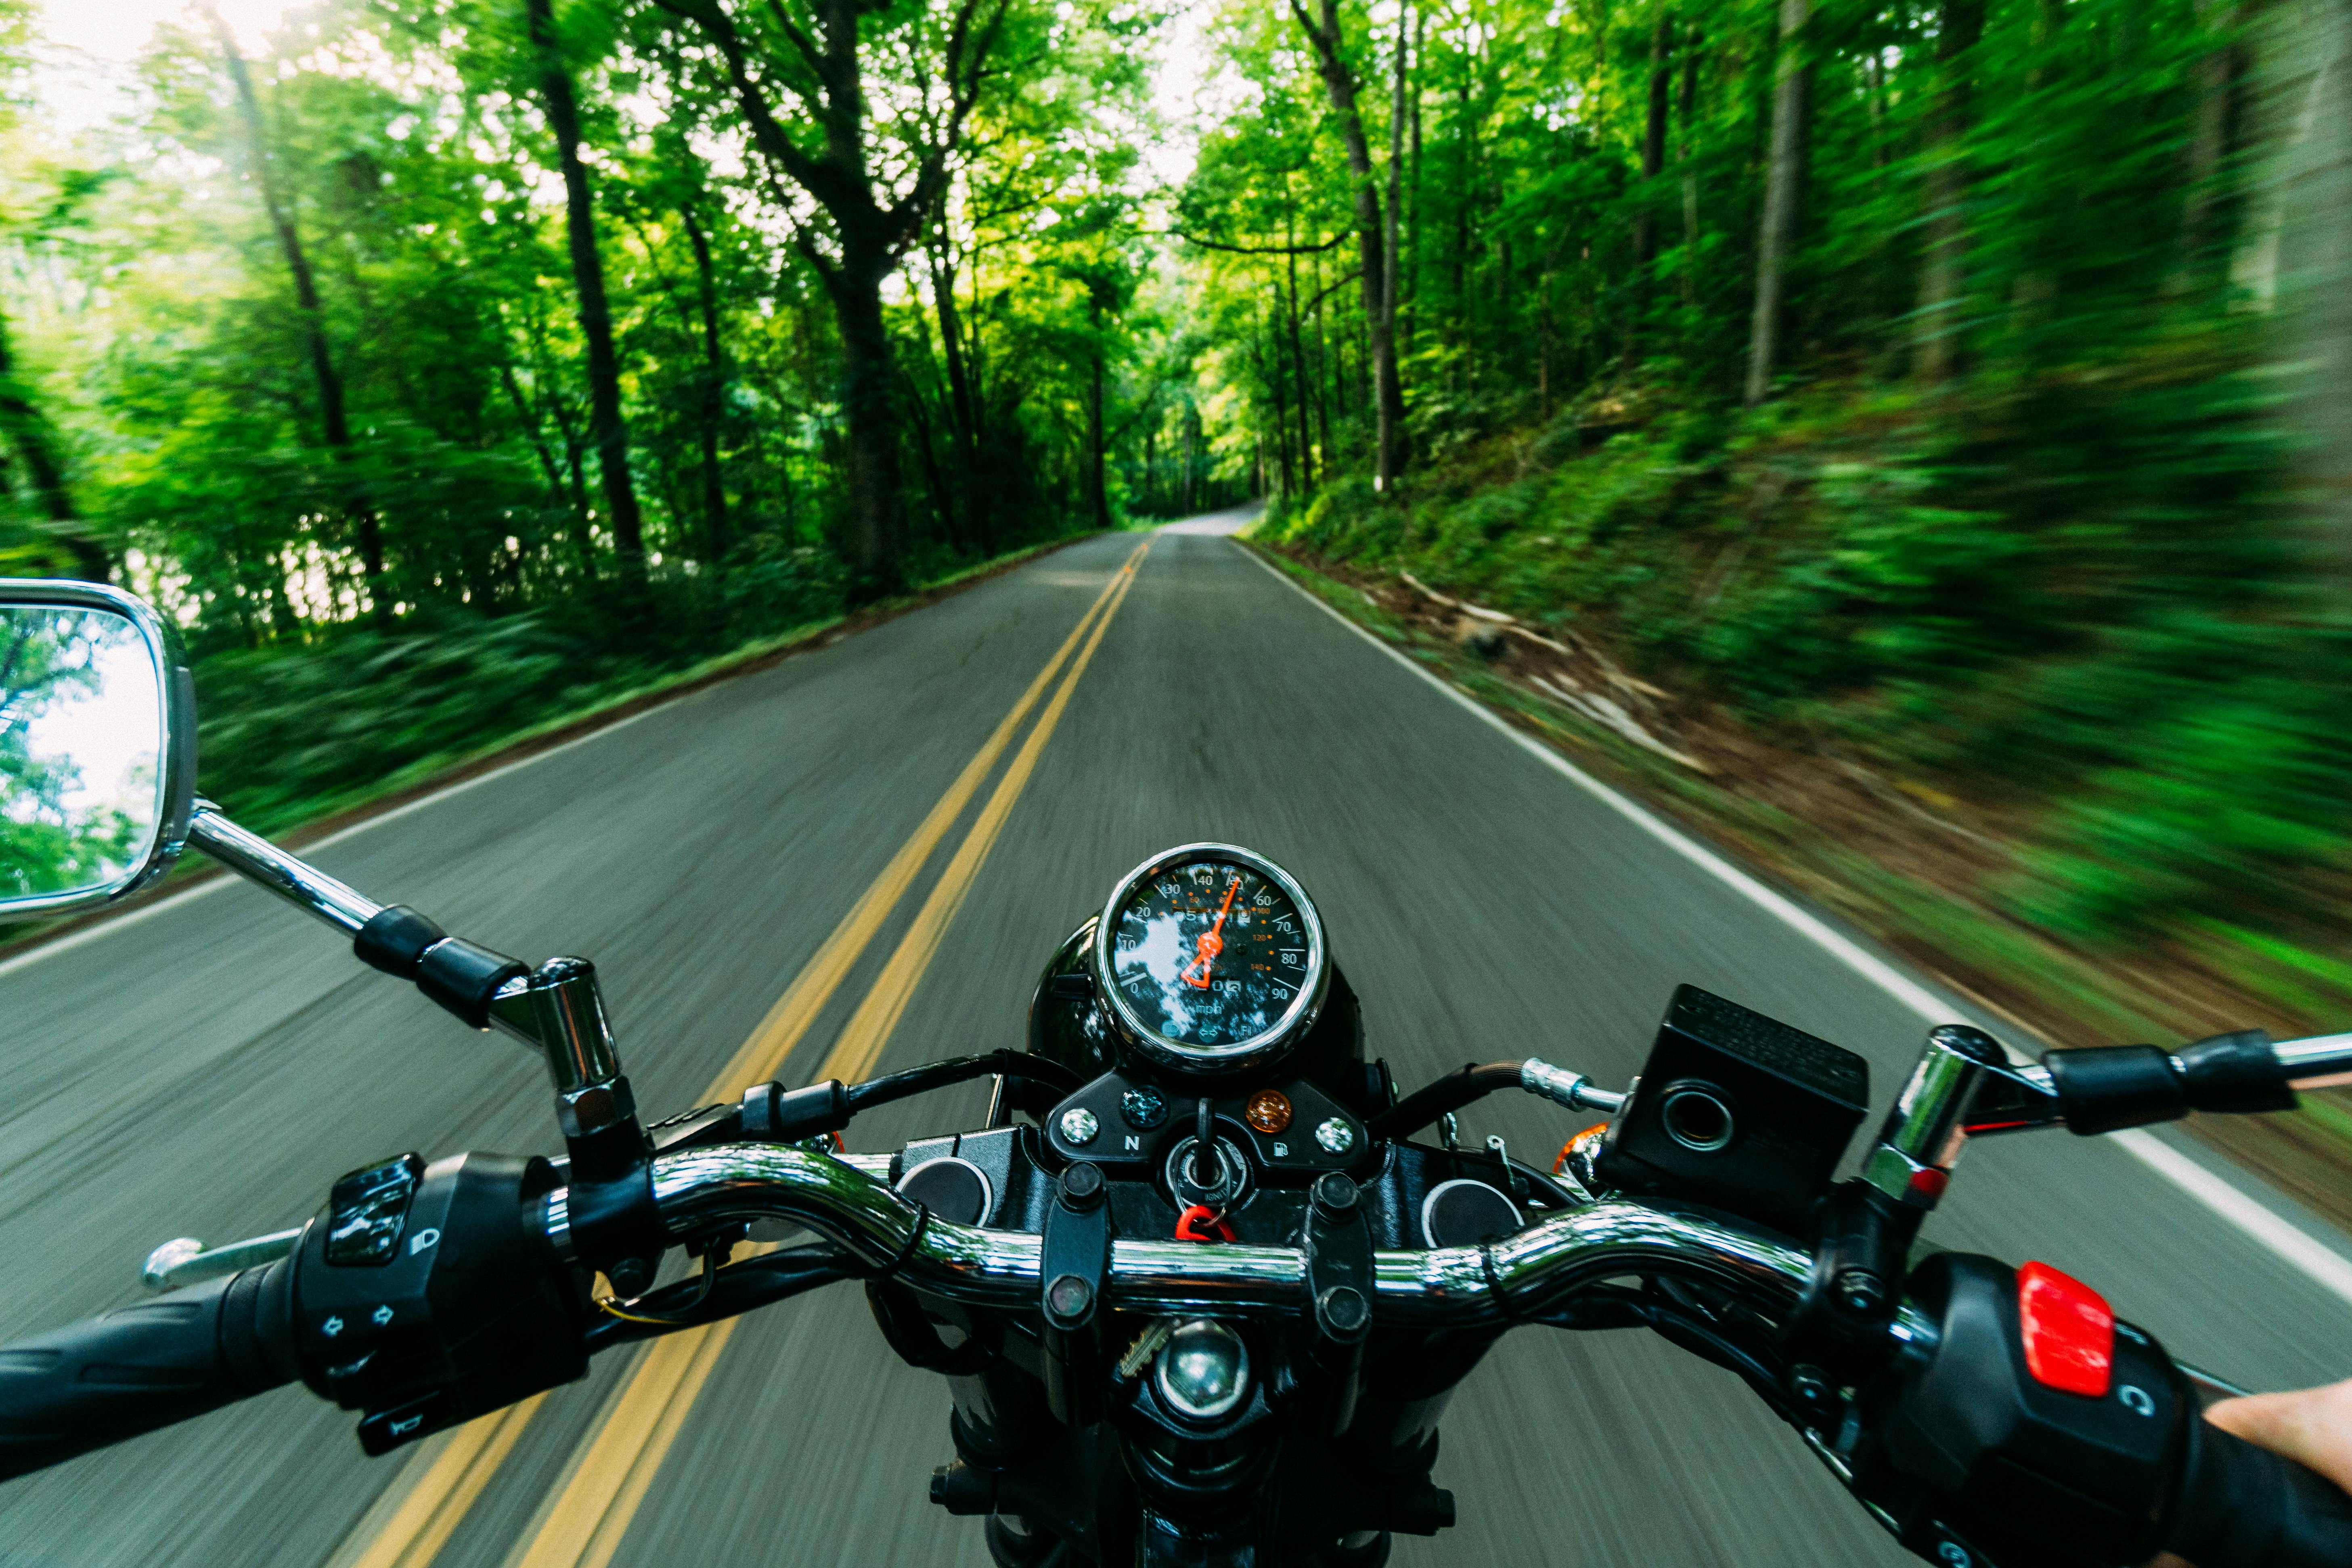 Rider Photos, Download The BEST Free Rider Stock Photos & HD Images